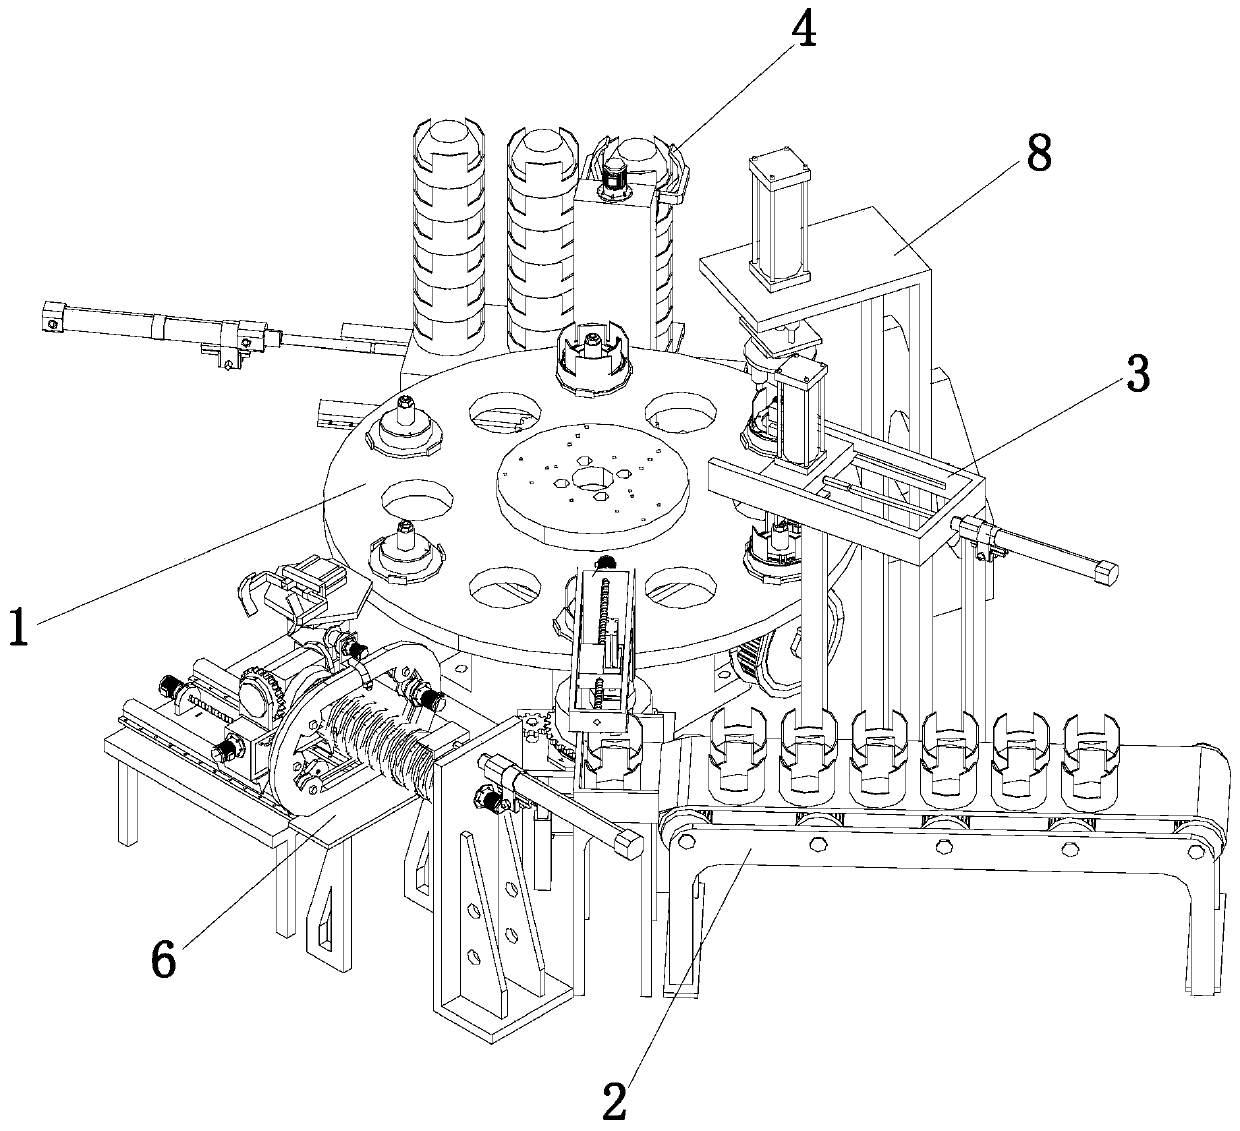 Core pipeline assembling mechanism and process of anesthesia evaporator core automatic assembling equipment